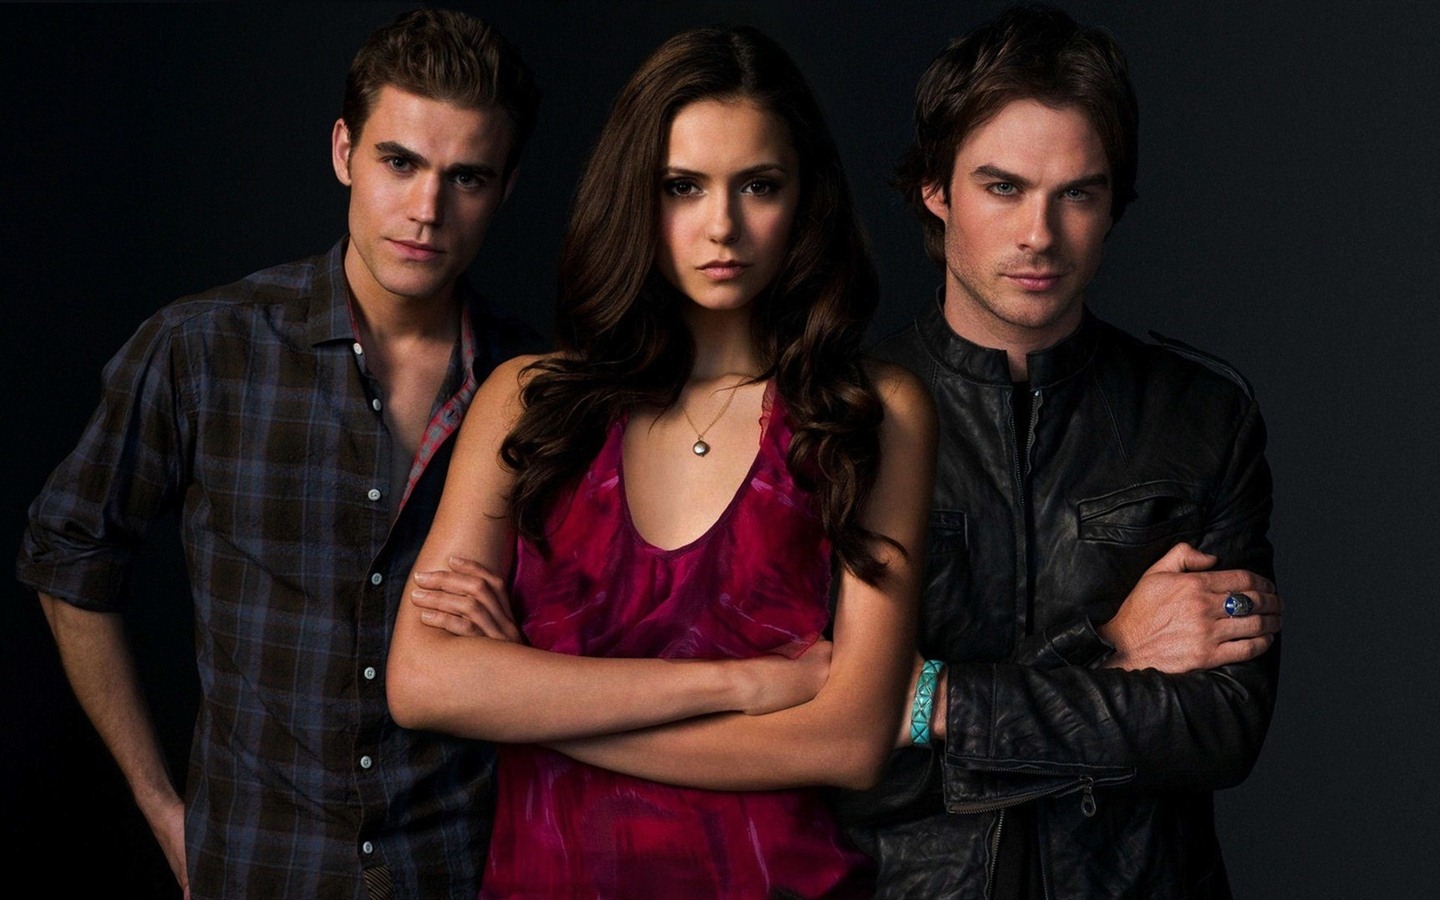 The Vampire Diaries wallpapers HD #10 - 1440x900